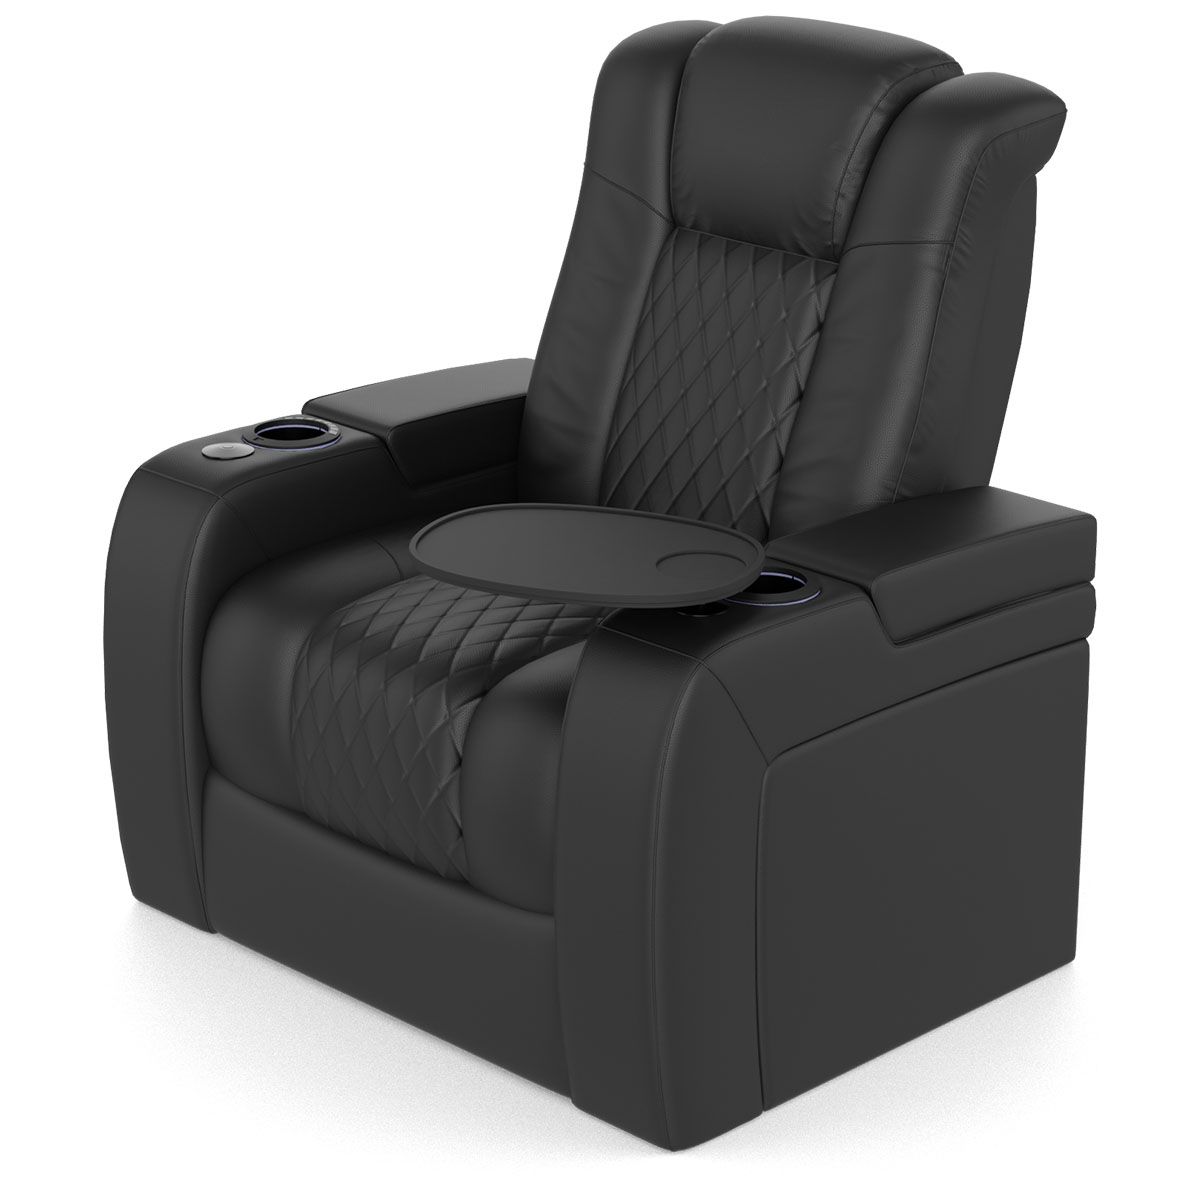 Audio Advice Revelation Home Theater Seating - right angled top view of 2 arm chair with tray table